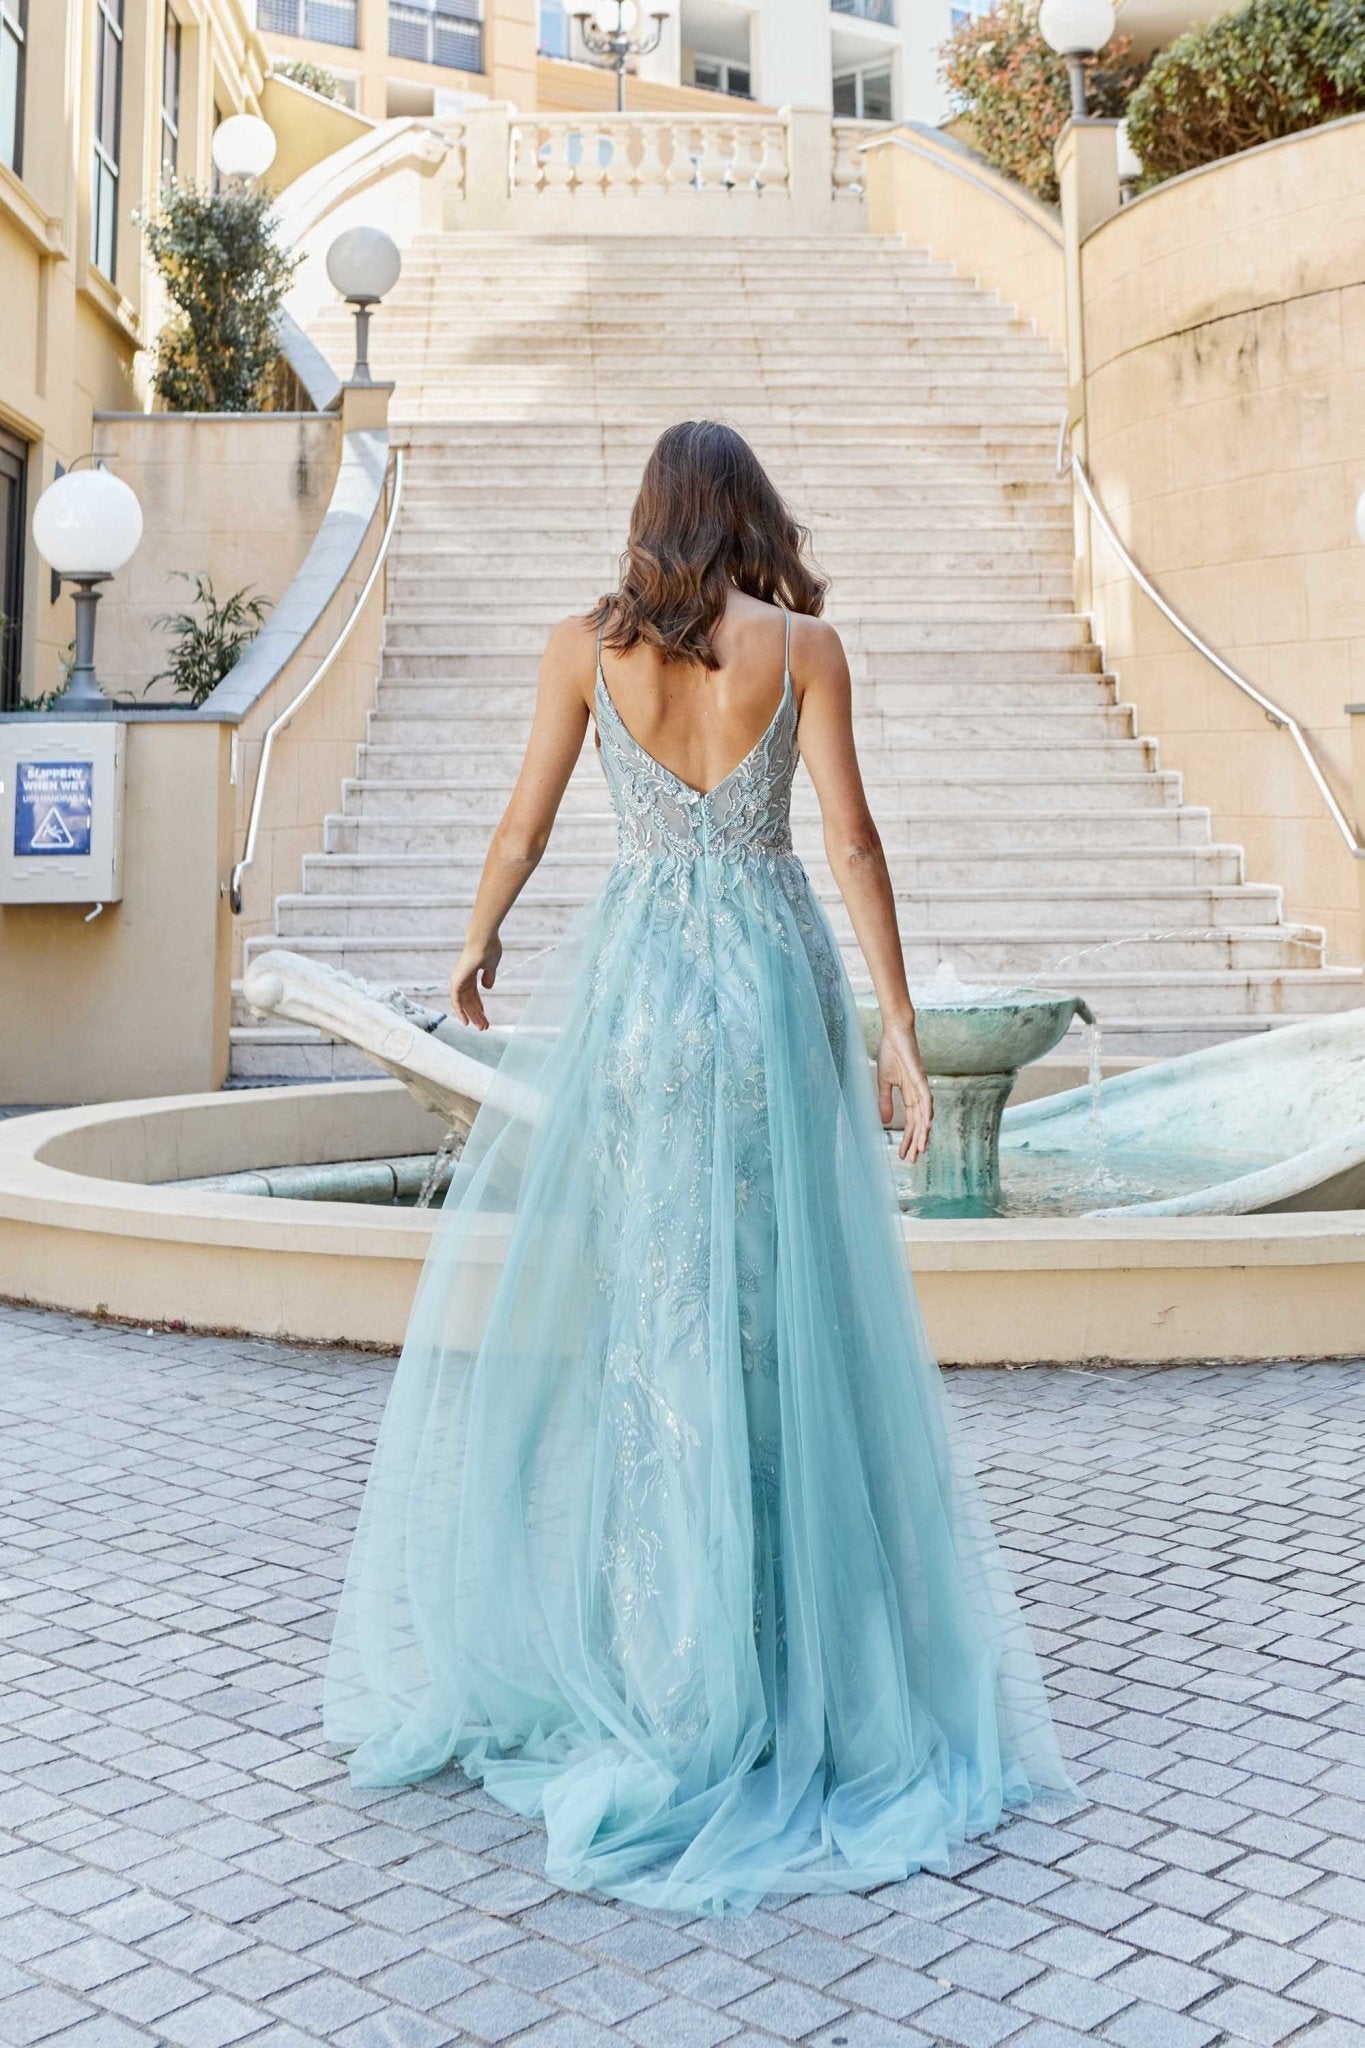 Hunter Maternity Tiered Tulle Prom Dress For Photo Shoot Robes Women Sheer  Full Sleeves Maxi Tiered Tulle Robe Formal Evening Gown Overlay From  Alegant_lady, $124.37 | DHgate.Com